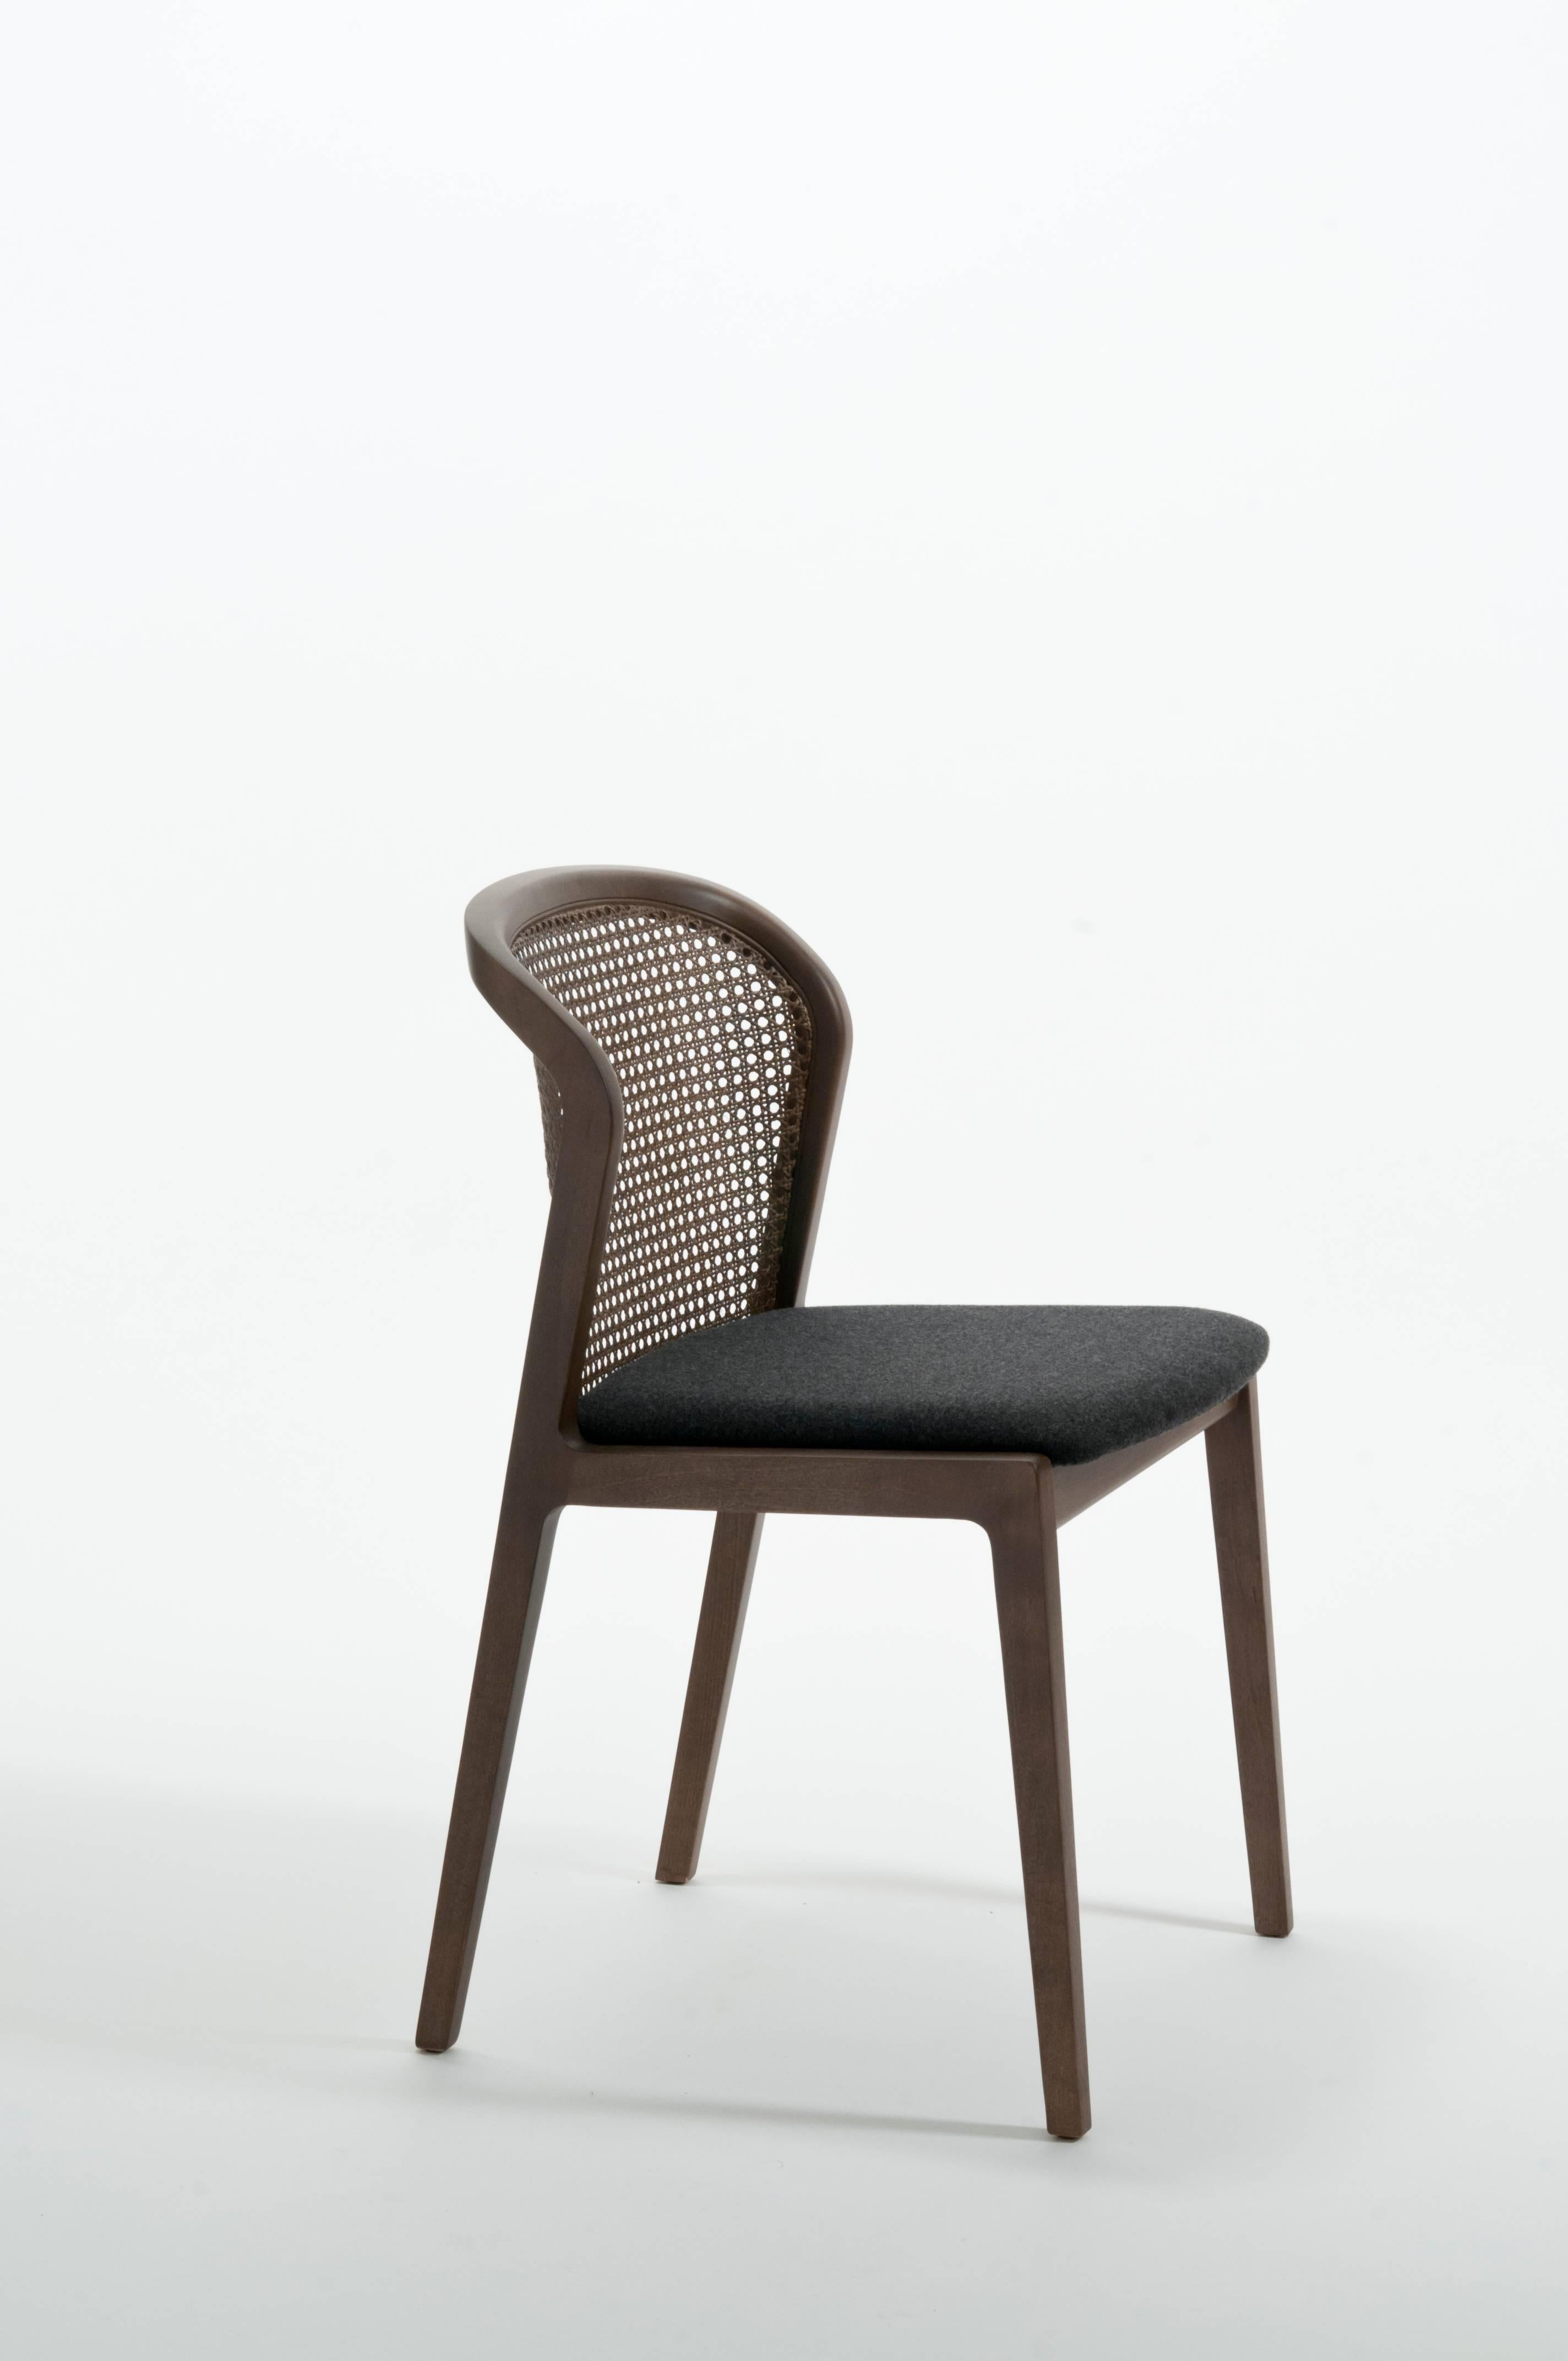 Machine-Made Vienna Chair Contemporary Design in Walnut and Straw, Blue Felt Upholstered Seat For Sale